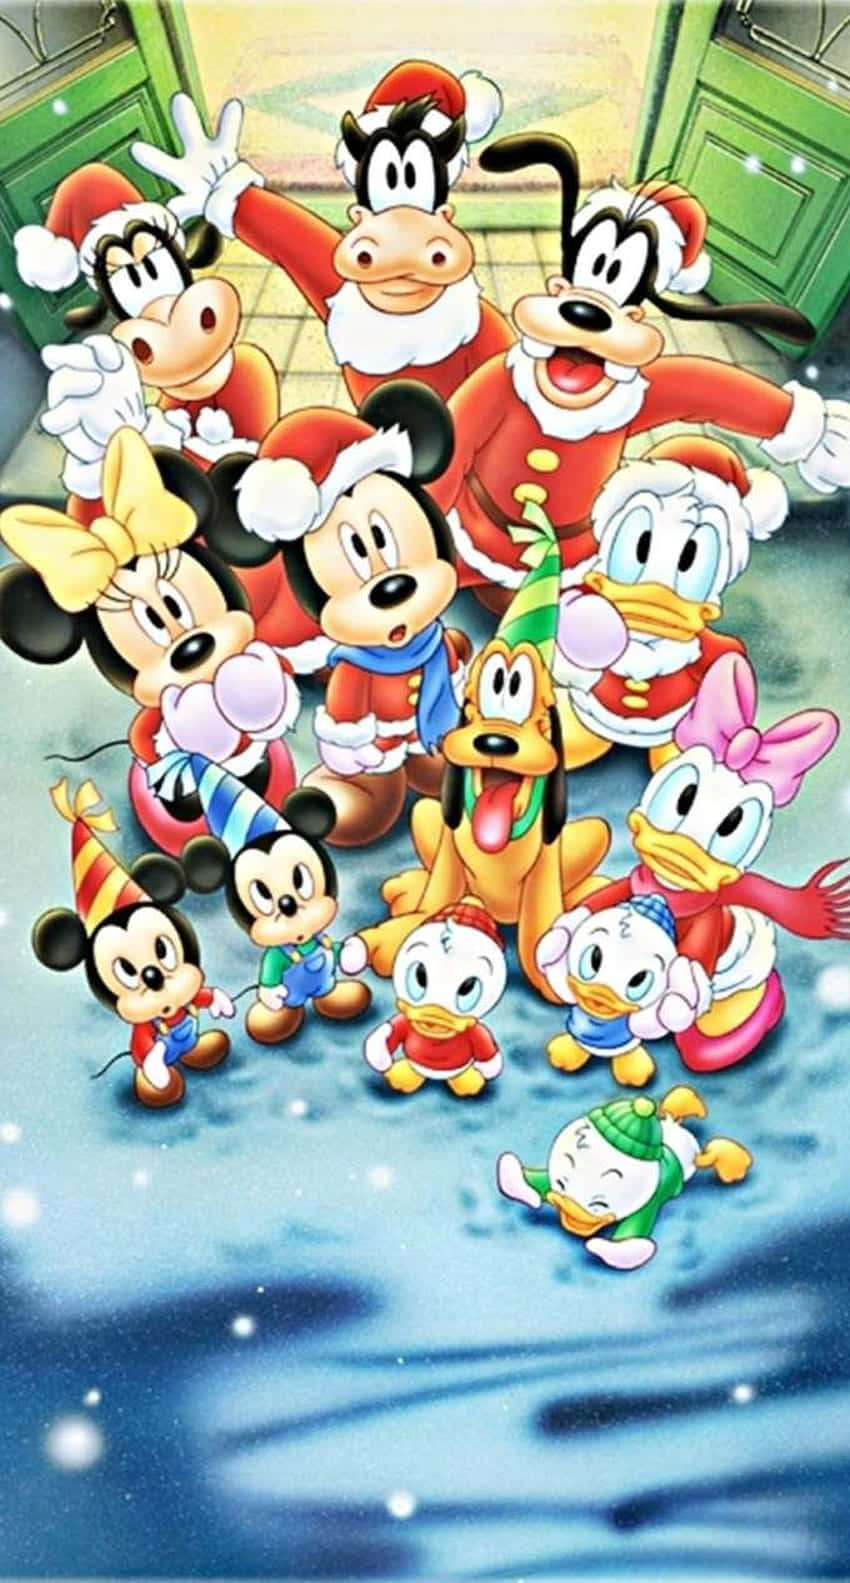 "Magical Christmas with Mickey Mouse and Friends" Wallpaper